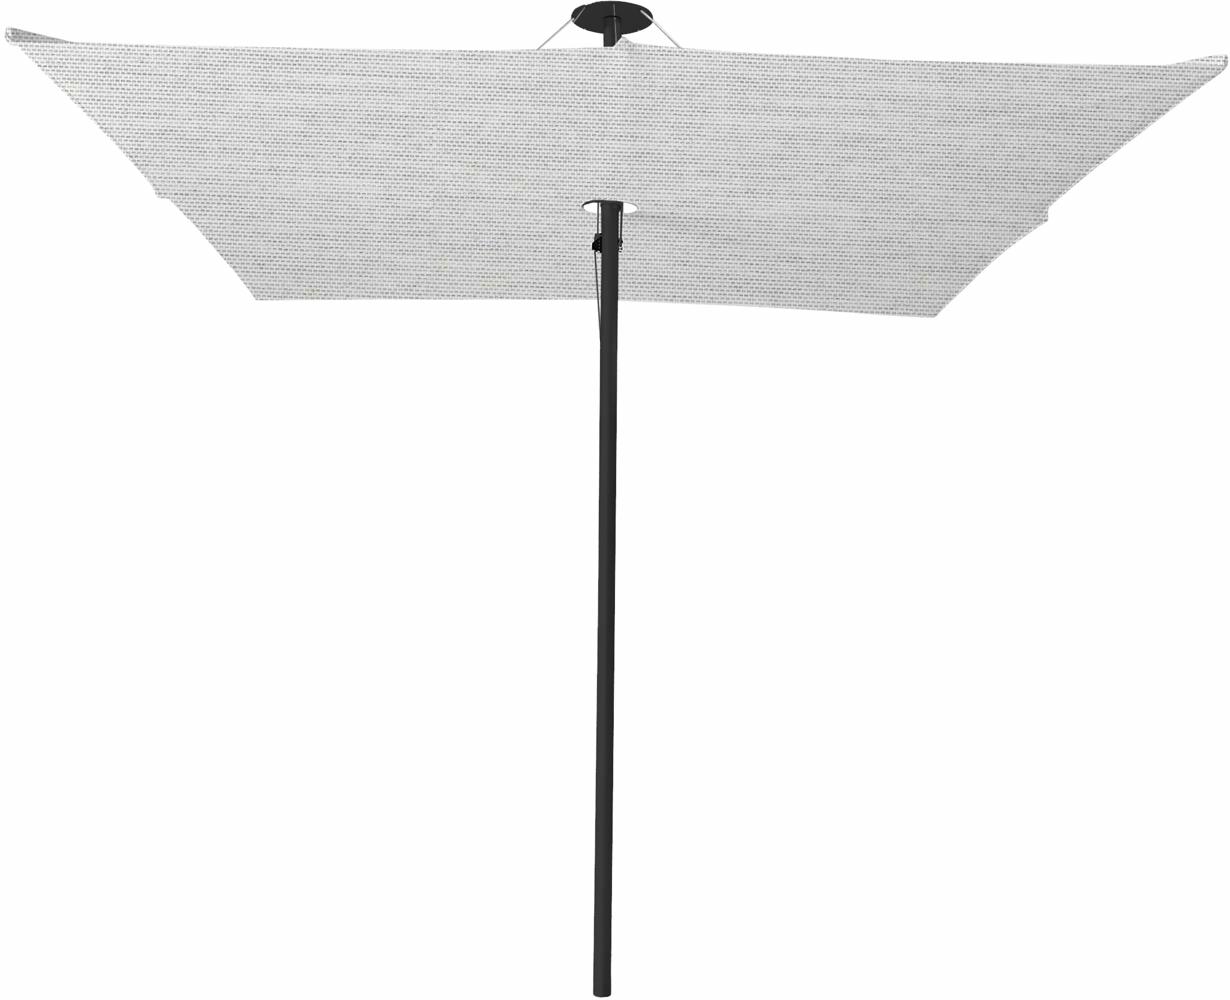 Infina center post umbrella, 2,5 m square, with frame in Dusk and Solidum Marble canopy. 